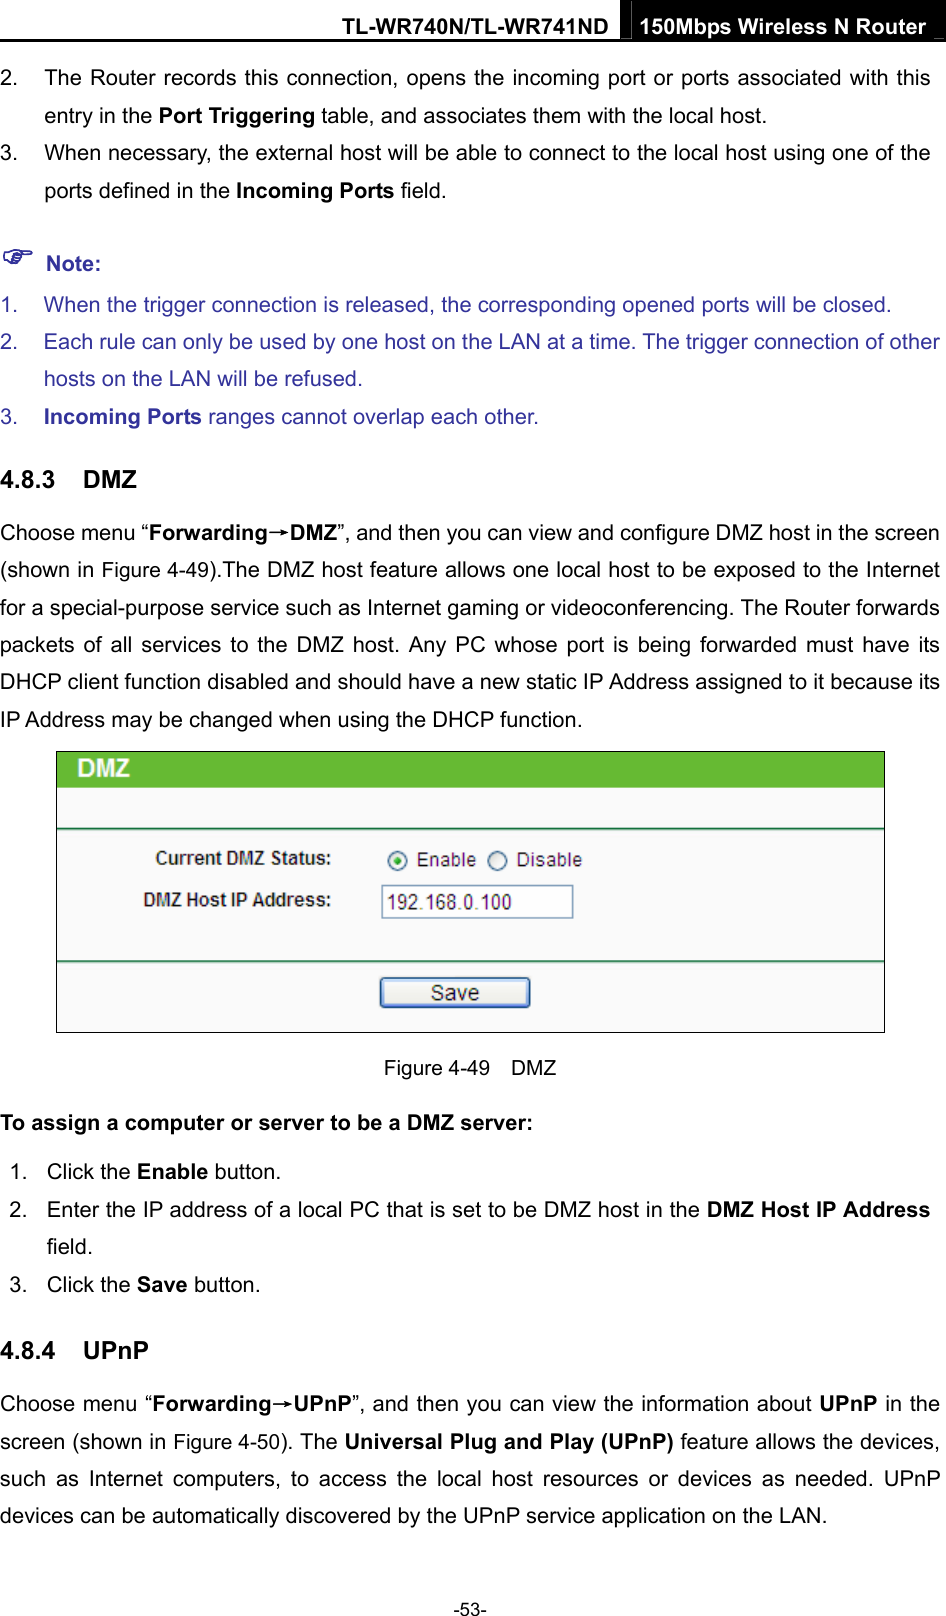 TL-WR740N/TL-WR741ND 150Mbps Wireless N Router  -53- 2.  The Router records this connection, opens the incoming port or ports associated with this entry in the Port Triggering table, and associates them with the local host.   3.  When necessary, the external host will be able to connect to the local host using one of the ports defined in the Incoming Ports field.   ) Note: 1.  When the trigger connection is released, the corresponding opened ports will be closed.   2.  Each rule can only be used by one host on the LAN at a time. The trigger connection of other hosts on the LAN will be refused.   3.  Incoming Ports ranges cannot overlap each other.   4.8.3  DMZ Choose menu “Forwarding→DMZ”, and then you can view and configure DMZ host in the screen (shown in Figure 4-49).The DMZ host feature allows one local host to be exposed to the Internet for a special-purpose service such as Internet gaming or videoconferencing. The Router forwards packets of all services to the DMZ host. Any PC whose port is being forwarded must have its DHCP client function disabled and should have a new static IP Address assigned to it because its IP Address may be changed when using the DHCP function.  Figure 4-49  DMZ To assign a computer or server to be a DMZ server:   1. Click the Enable button.   2.  Enter the IP address of a local PC that is set to be DMZ host in the DMZ Host IP Address field.  3. Click the Save button.   4.8.4  UPnP Choose menu “Forwarding→UPnP”, and then you can view the information about UPnP in the screen (shown in Figure 4-50). The Universal Plug and Play (UPnP) feature allows the devices, such as Internet computers, to access the local host resources or devices as needed. UPnP devices can be automatically discovered by the UPnP service application on the LAN. 